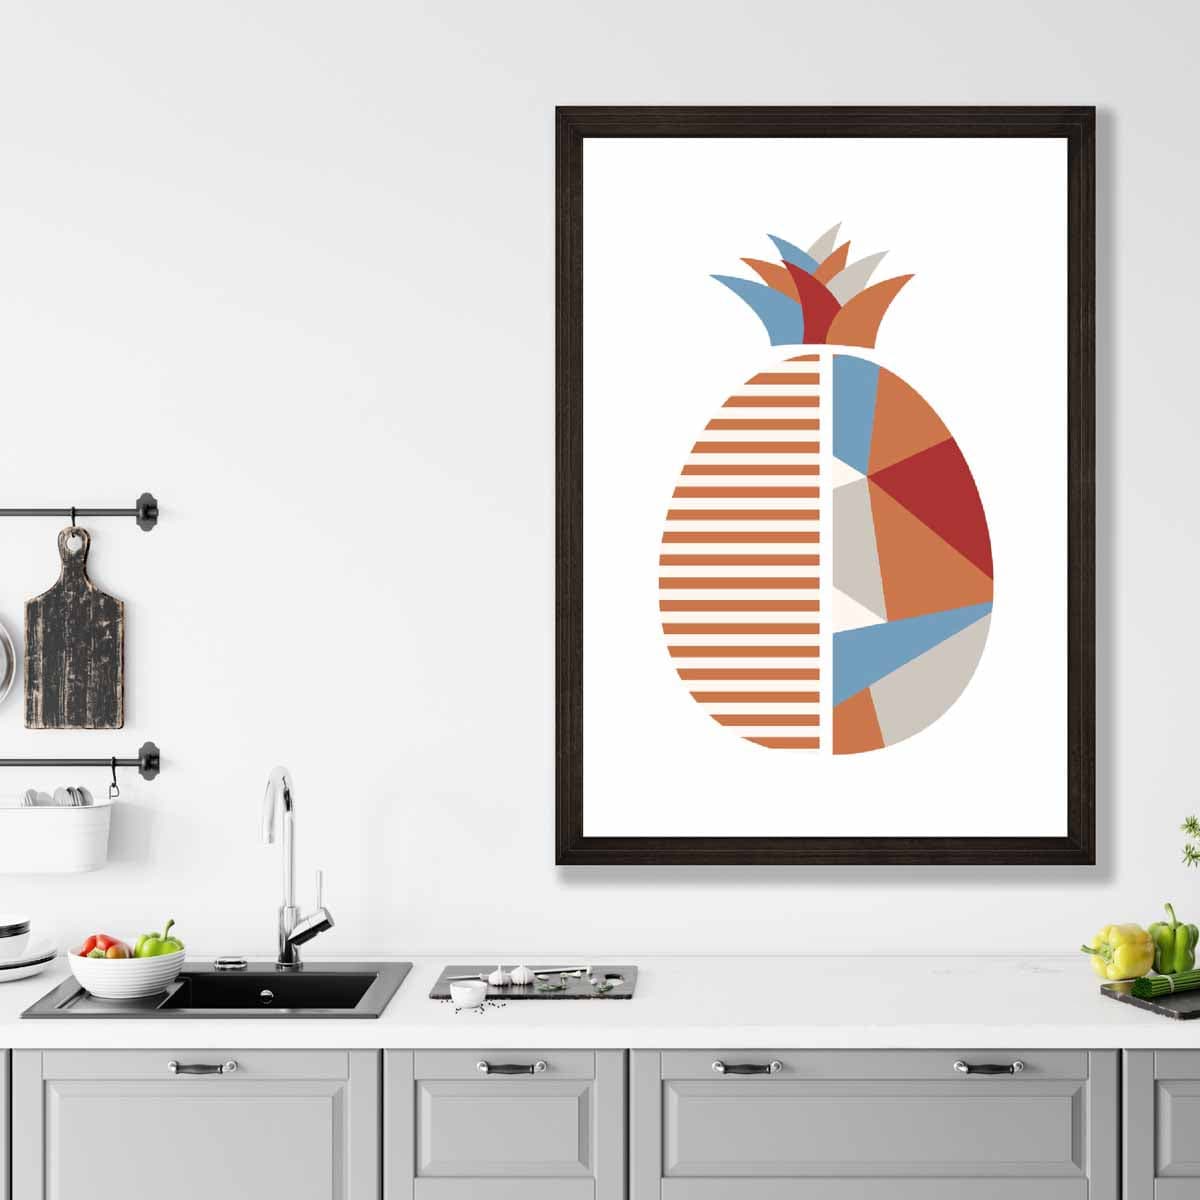 Geometric Fruit Poster of a Pineapple in Red Orange Blue